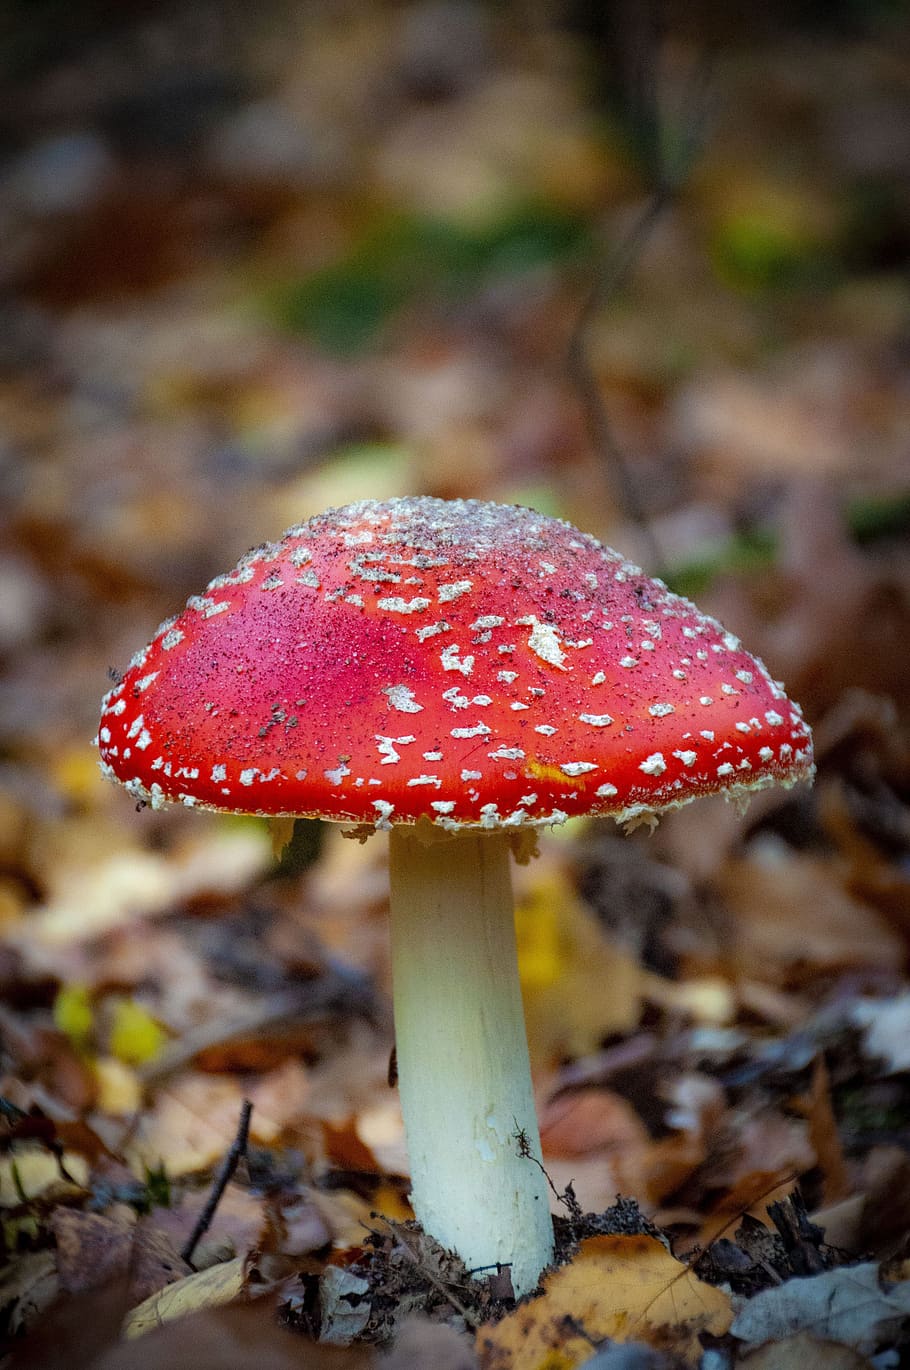 mushroom, red, forest, fly agaric, fungus, food, vegetable, close-up, growth, field